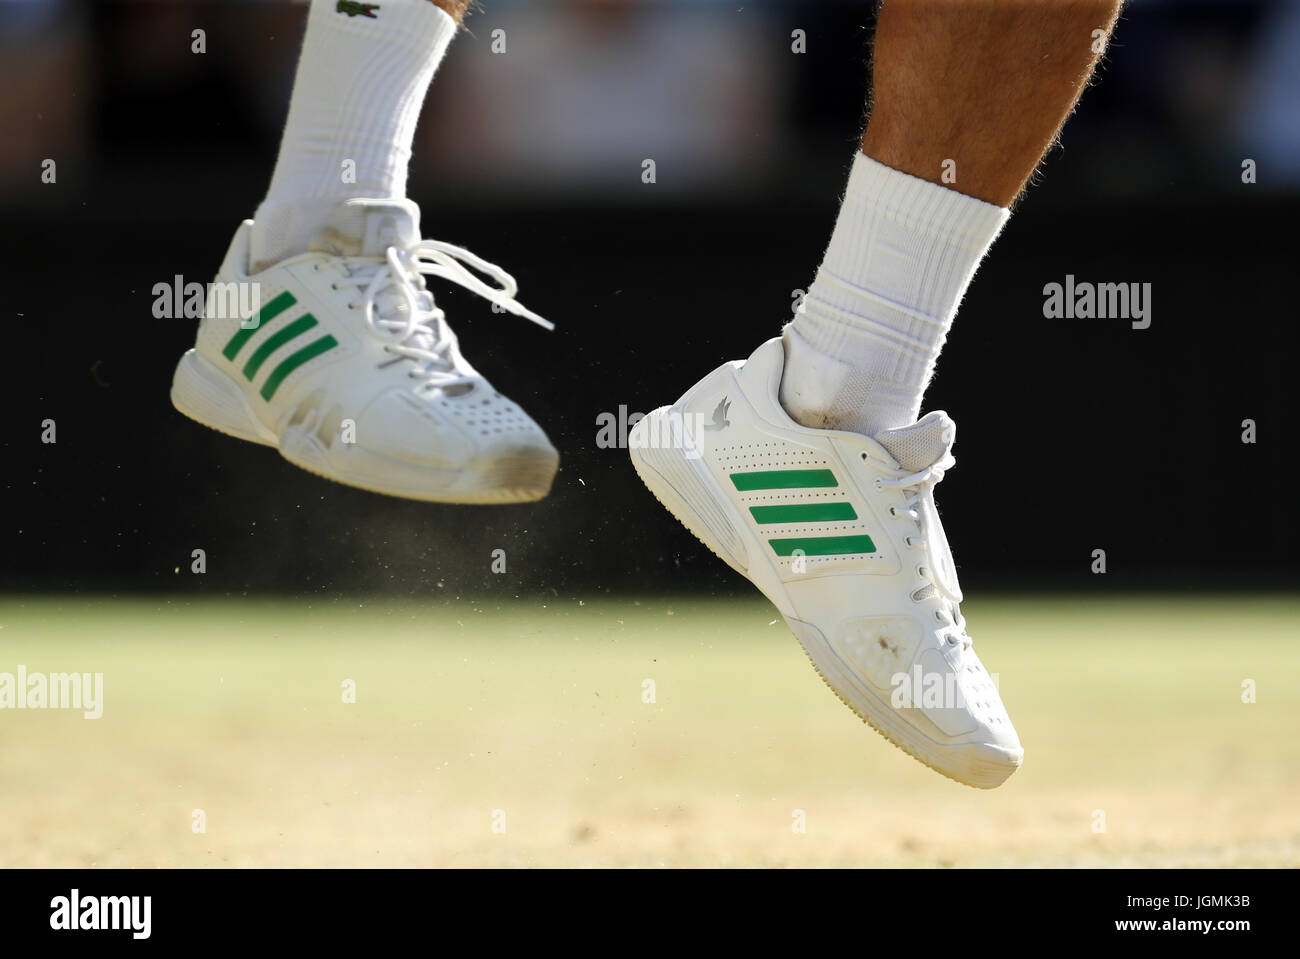 The Adidas trainers of Novak Djokovic on day six of the Wimbledon  Championships at The All England Lawn Tennis and Croquet Club, Wimbledon.  PRESS ASSOCIATION Photo. Picture date: Saturday July 8, 2017.